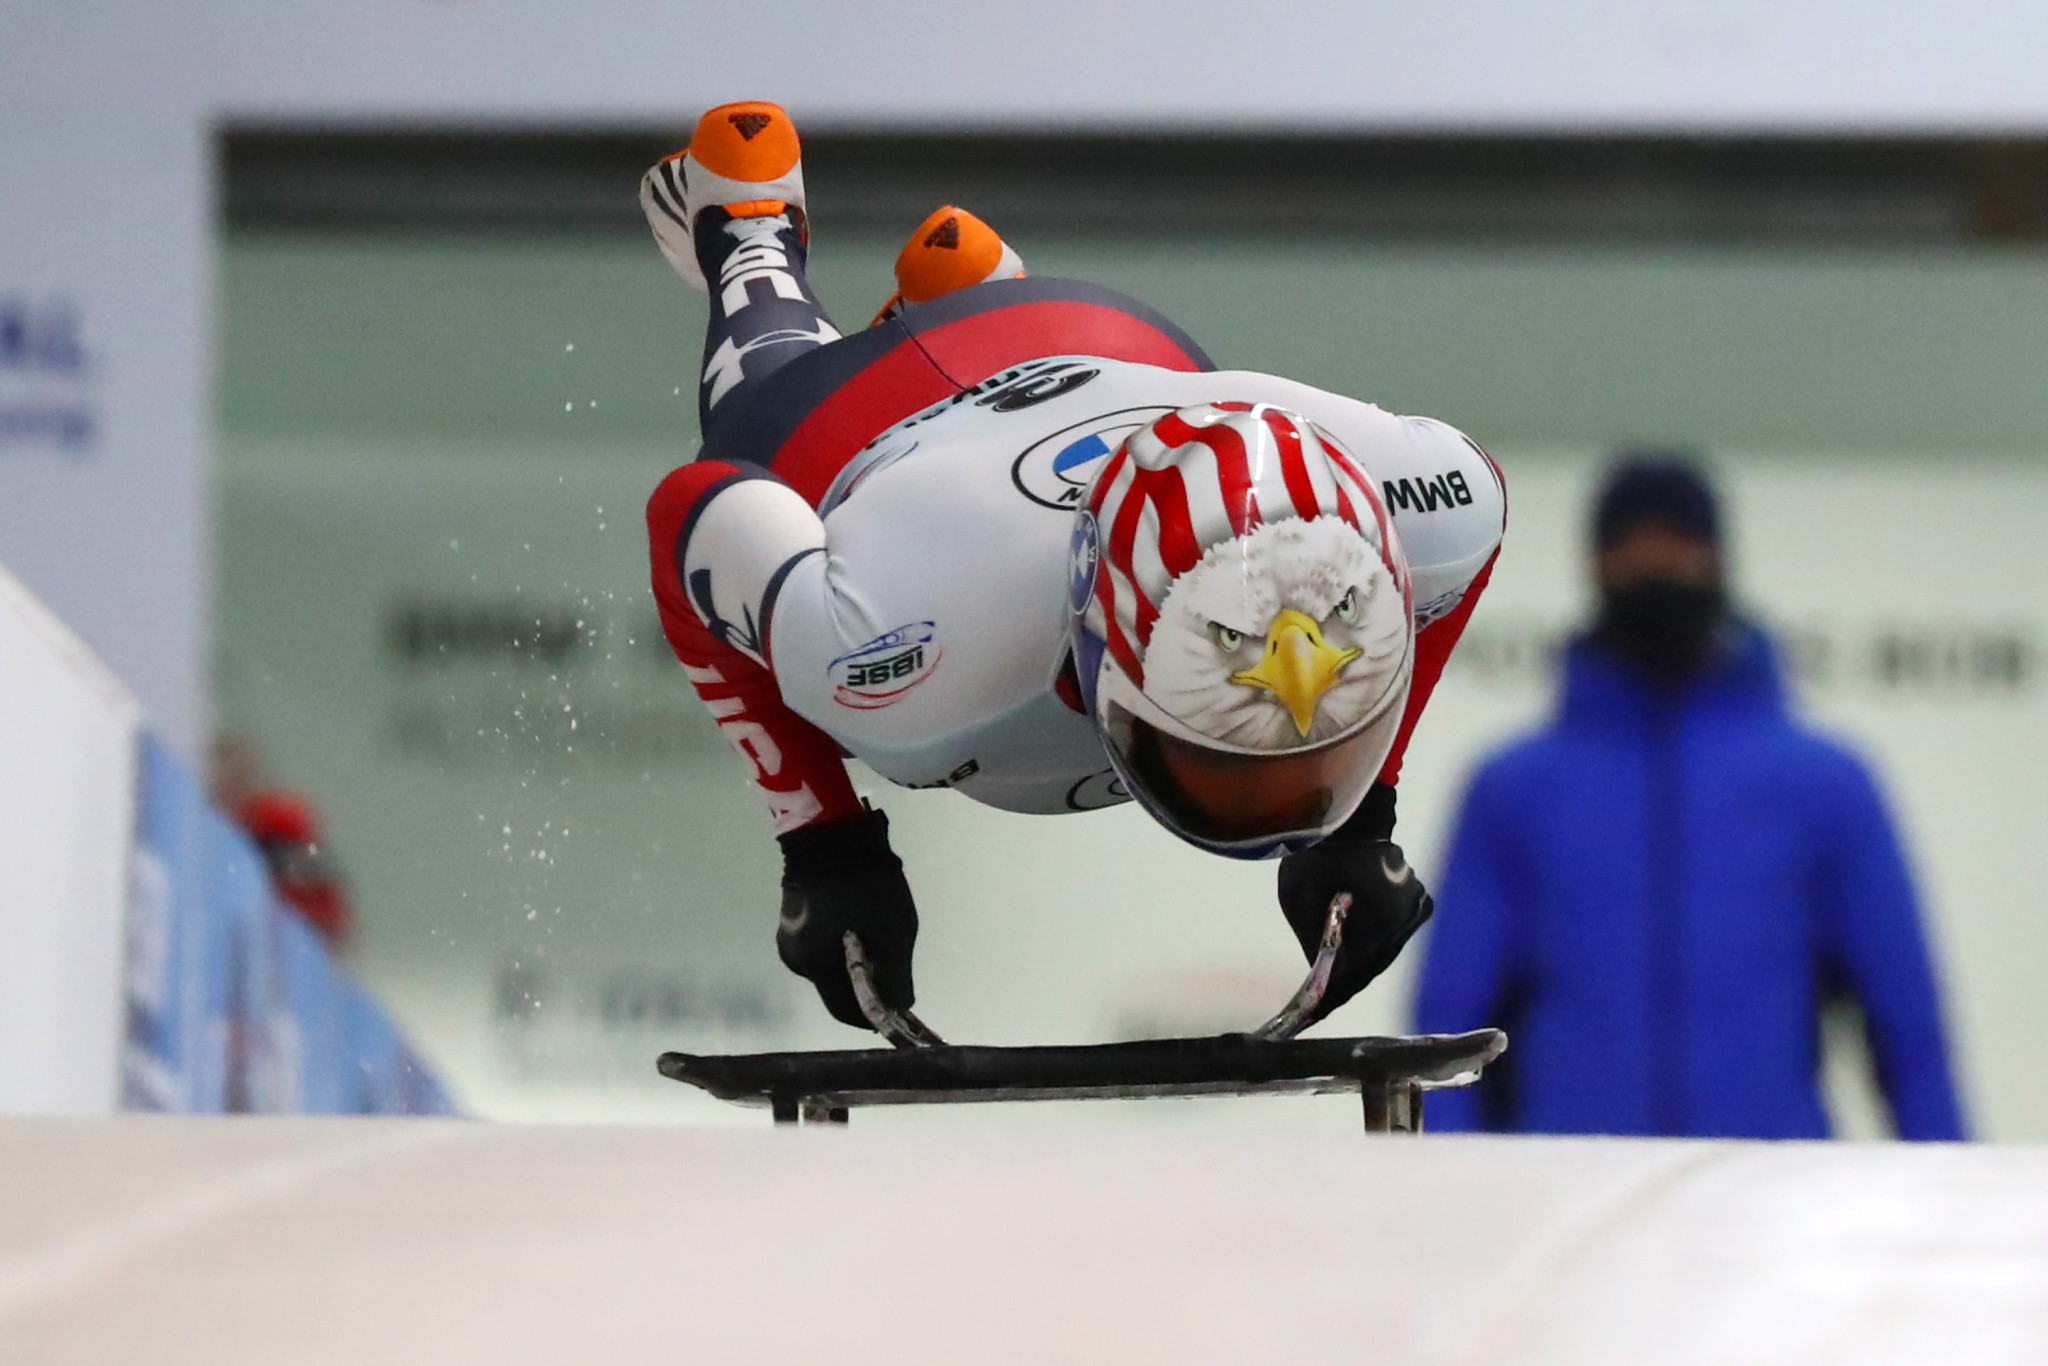 USA Bobsled and Skeleton has announced a number of partnerships in recent months ©Getty Images